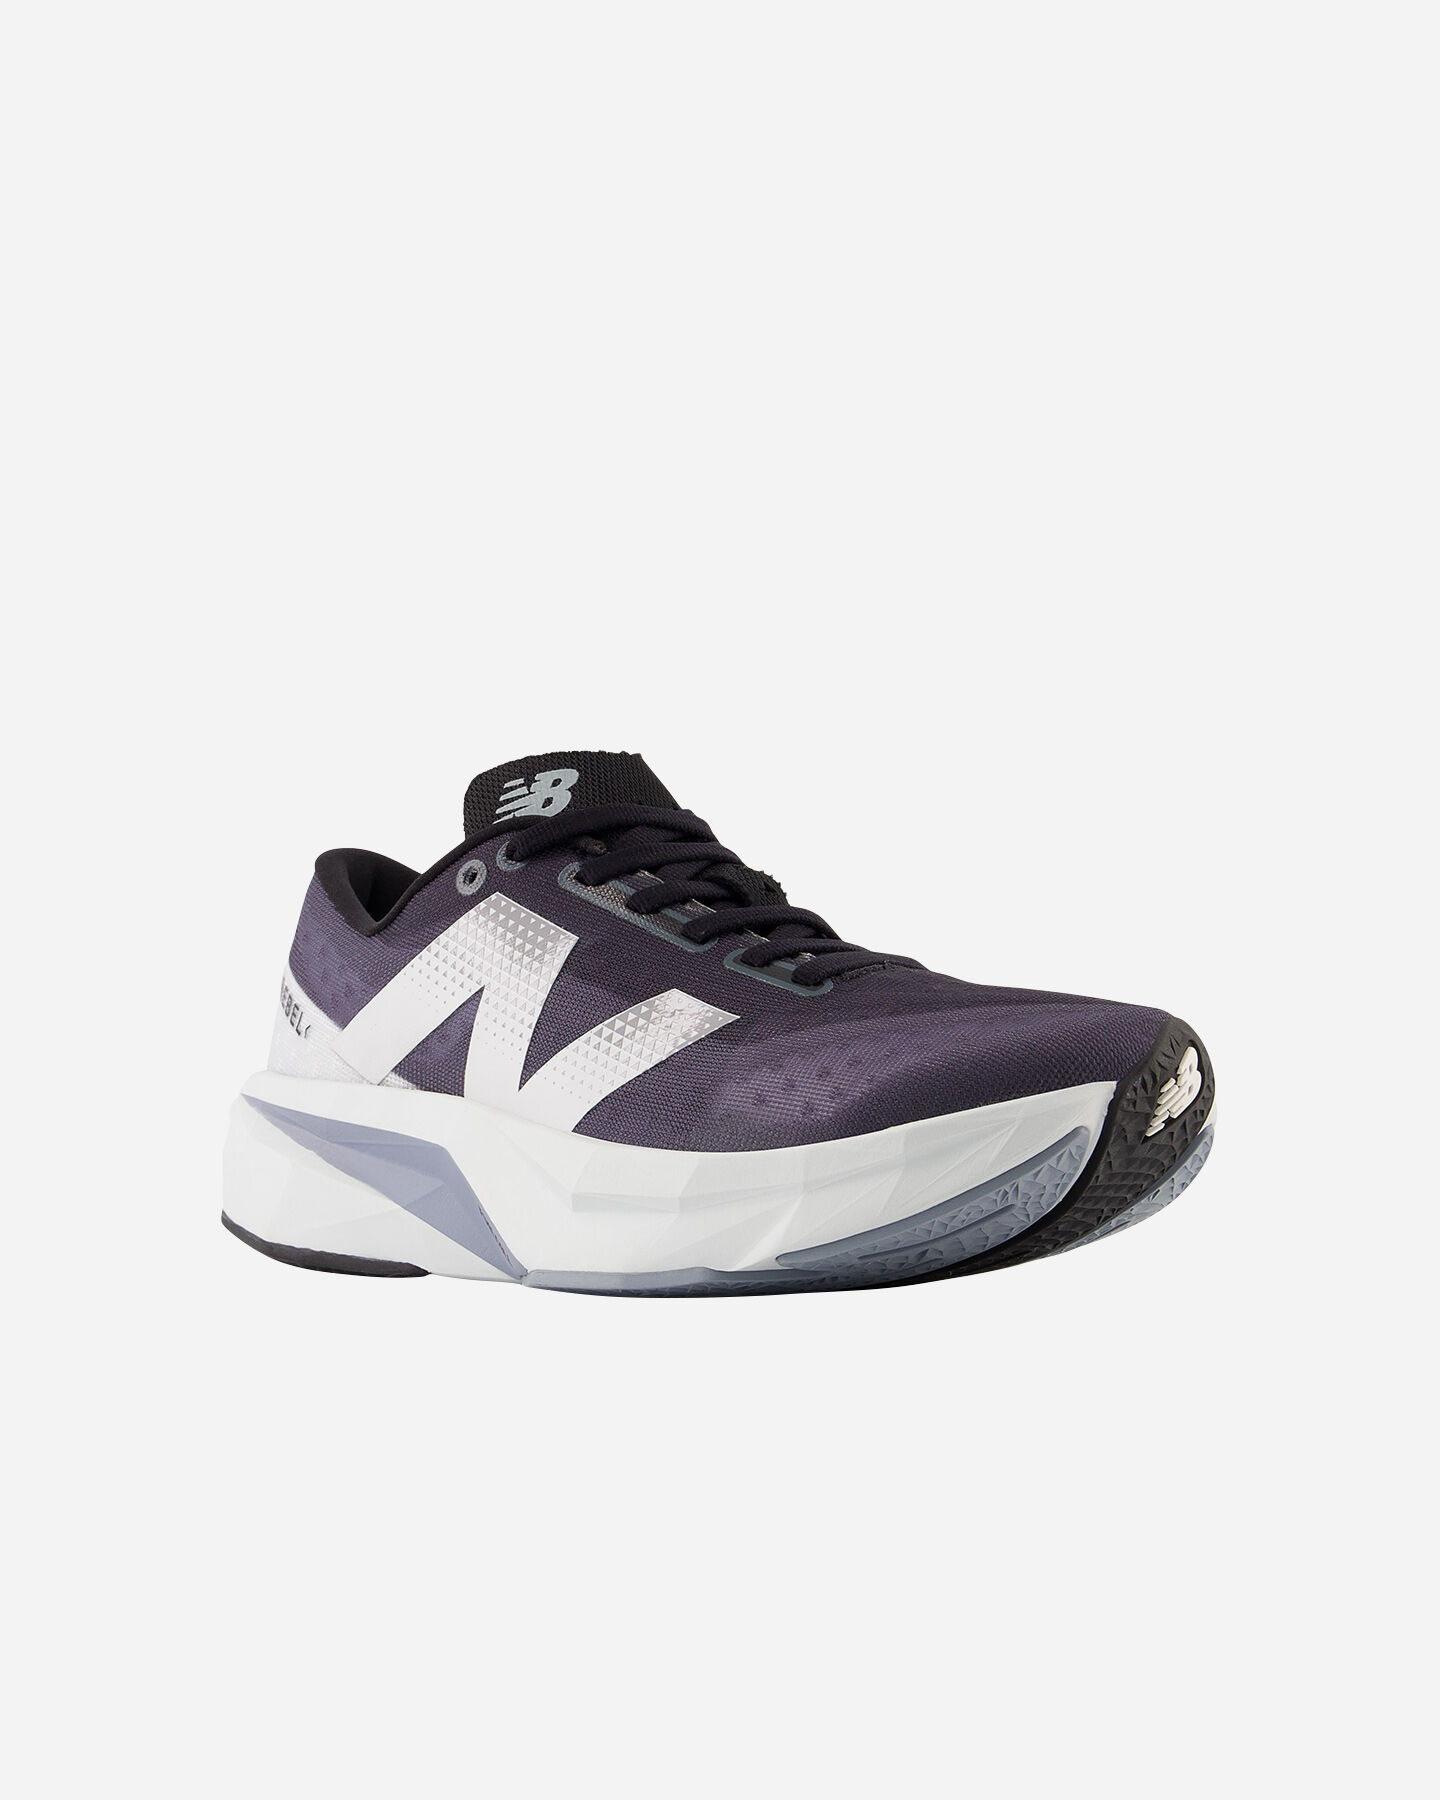  Scarpe running NEW BALANCE FUELCELL REBEL V4 W S5653001|-|B6 scatto 1